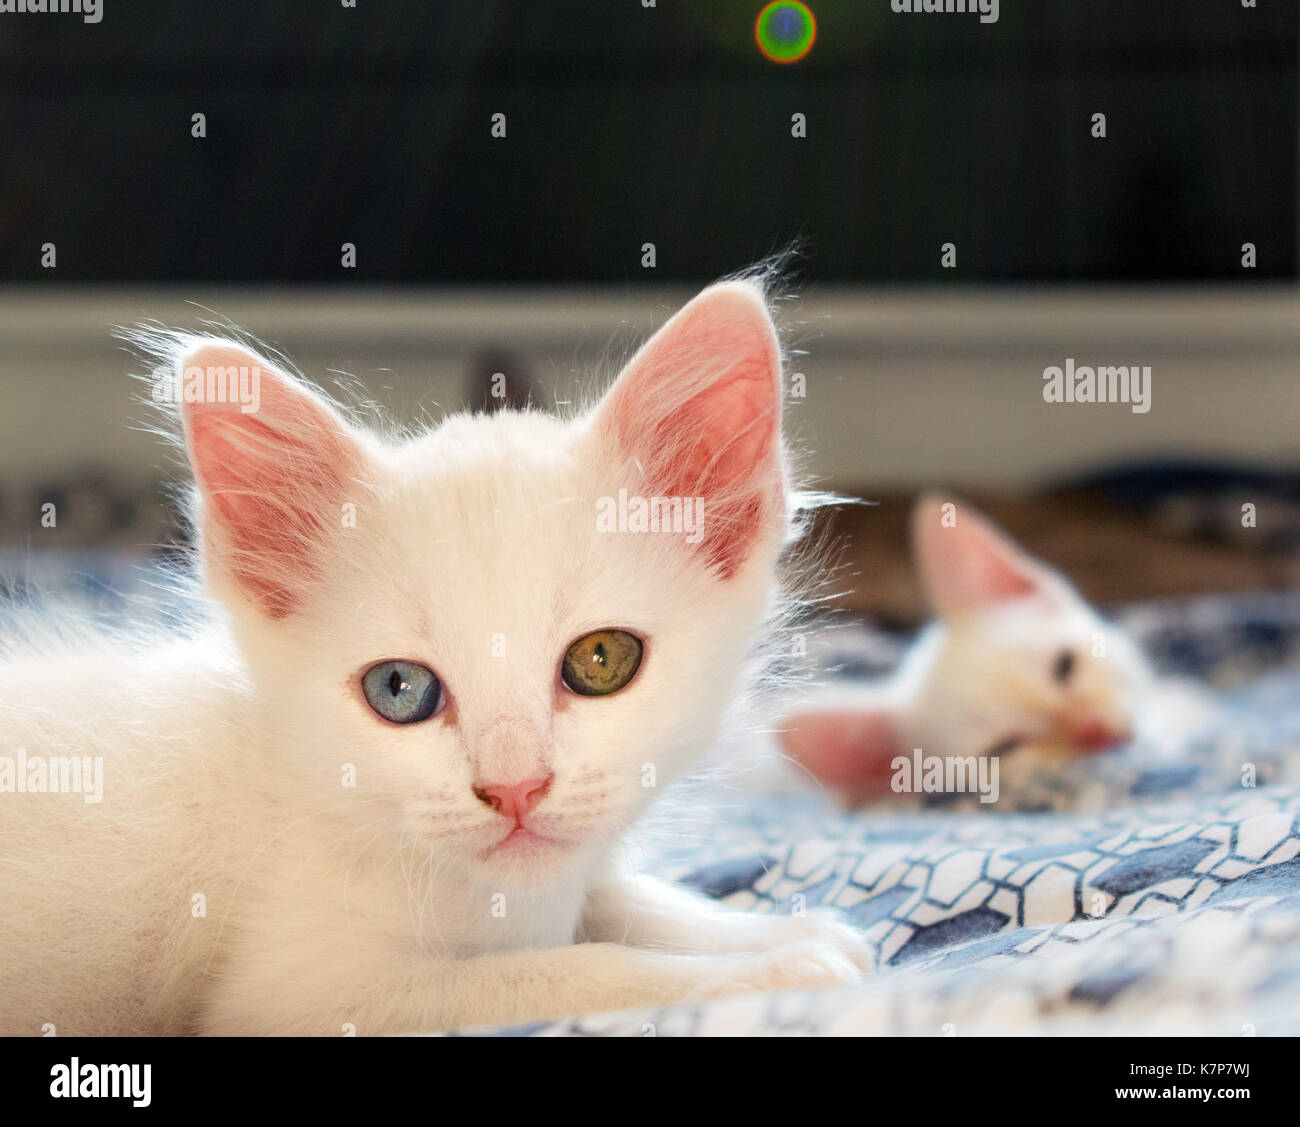 White cat with heterocromatic eyes, blue and yellow/green color, laying on bed, with another small cat in the background, two young cats, and lens fla Stock Photo